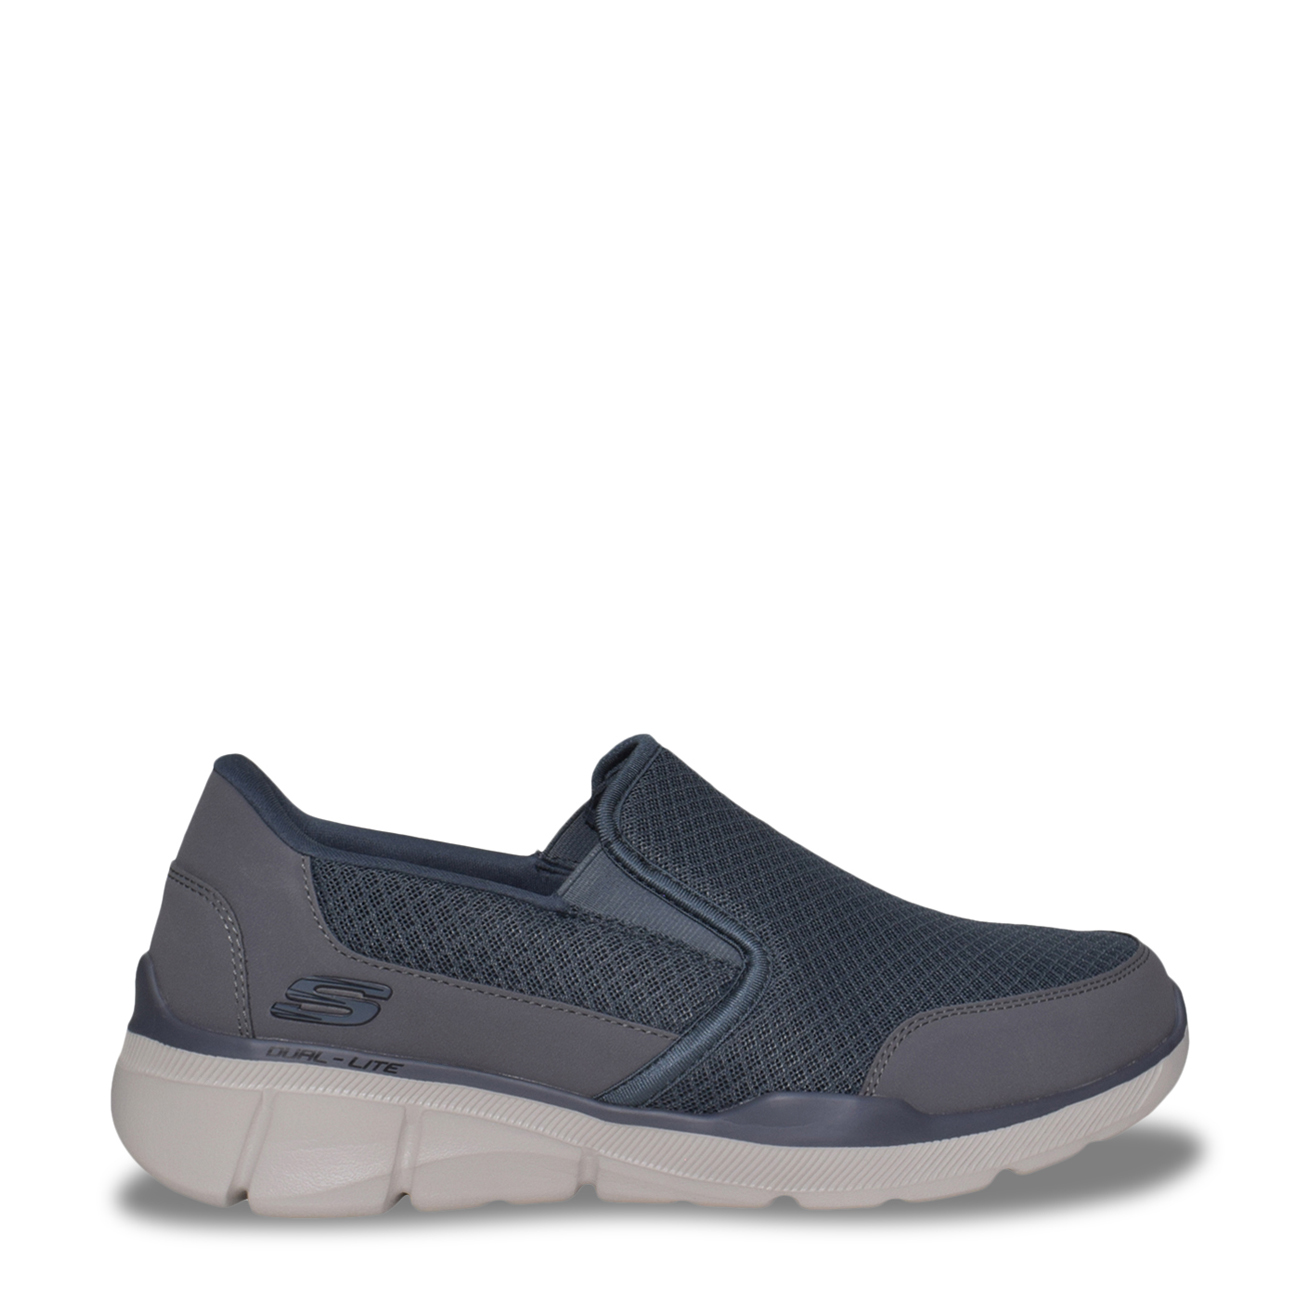 Men's Slip-On Shoes & Sneakers | The Shoe Company